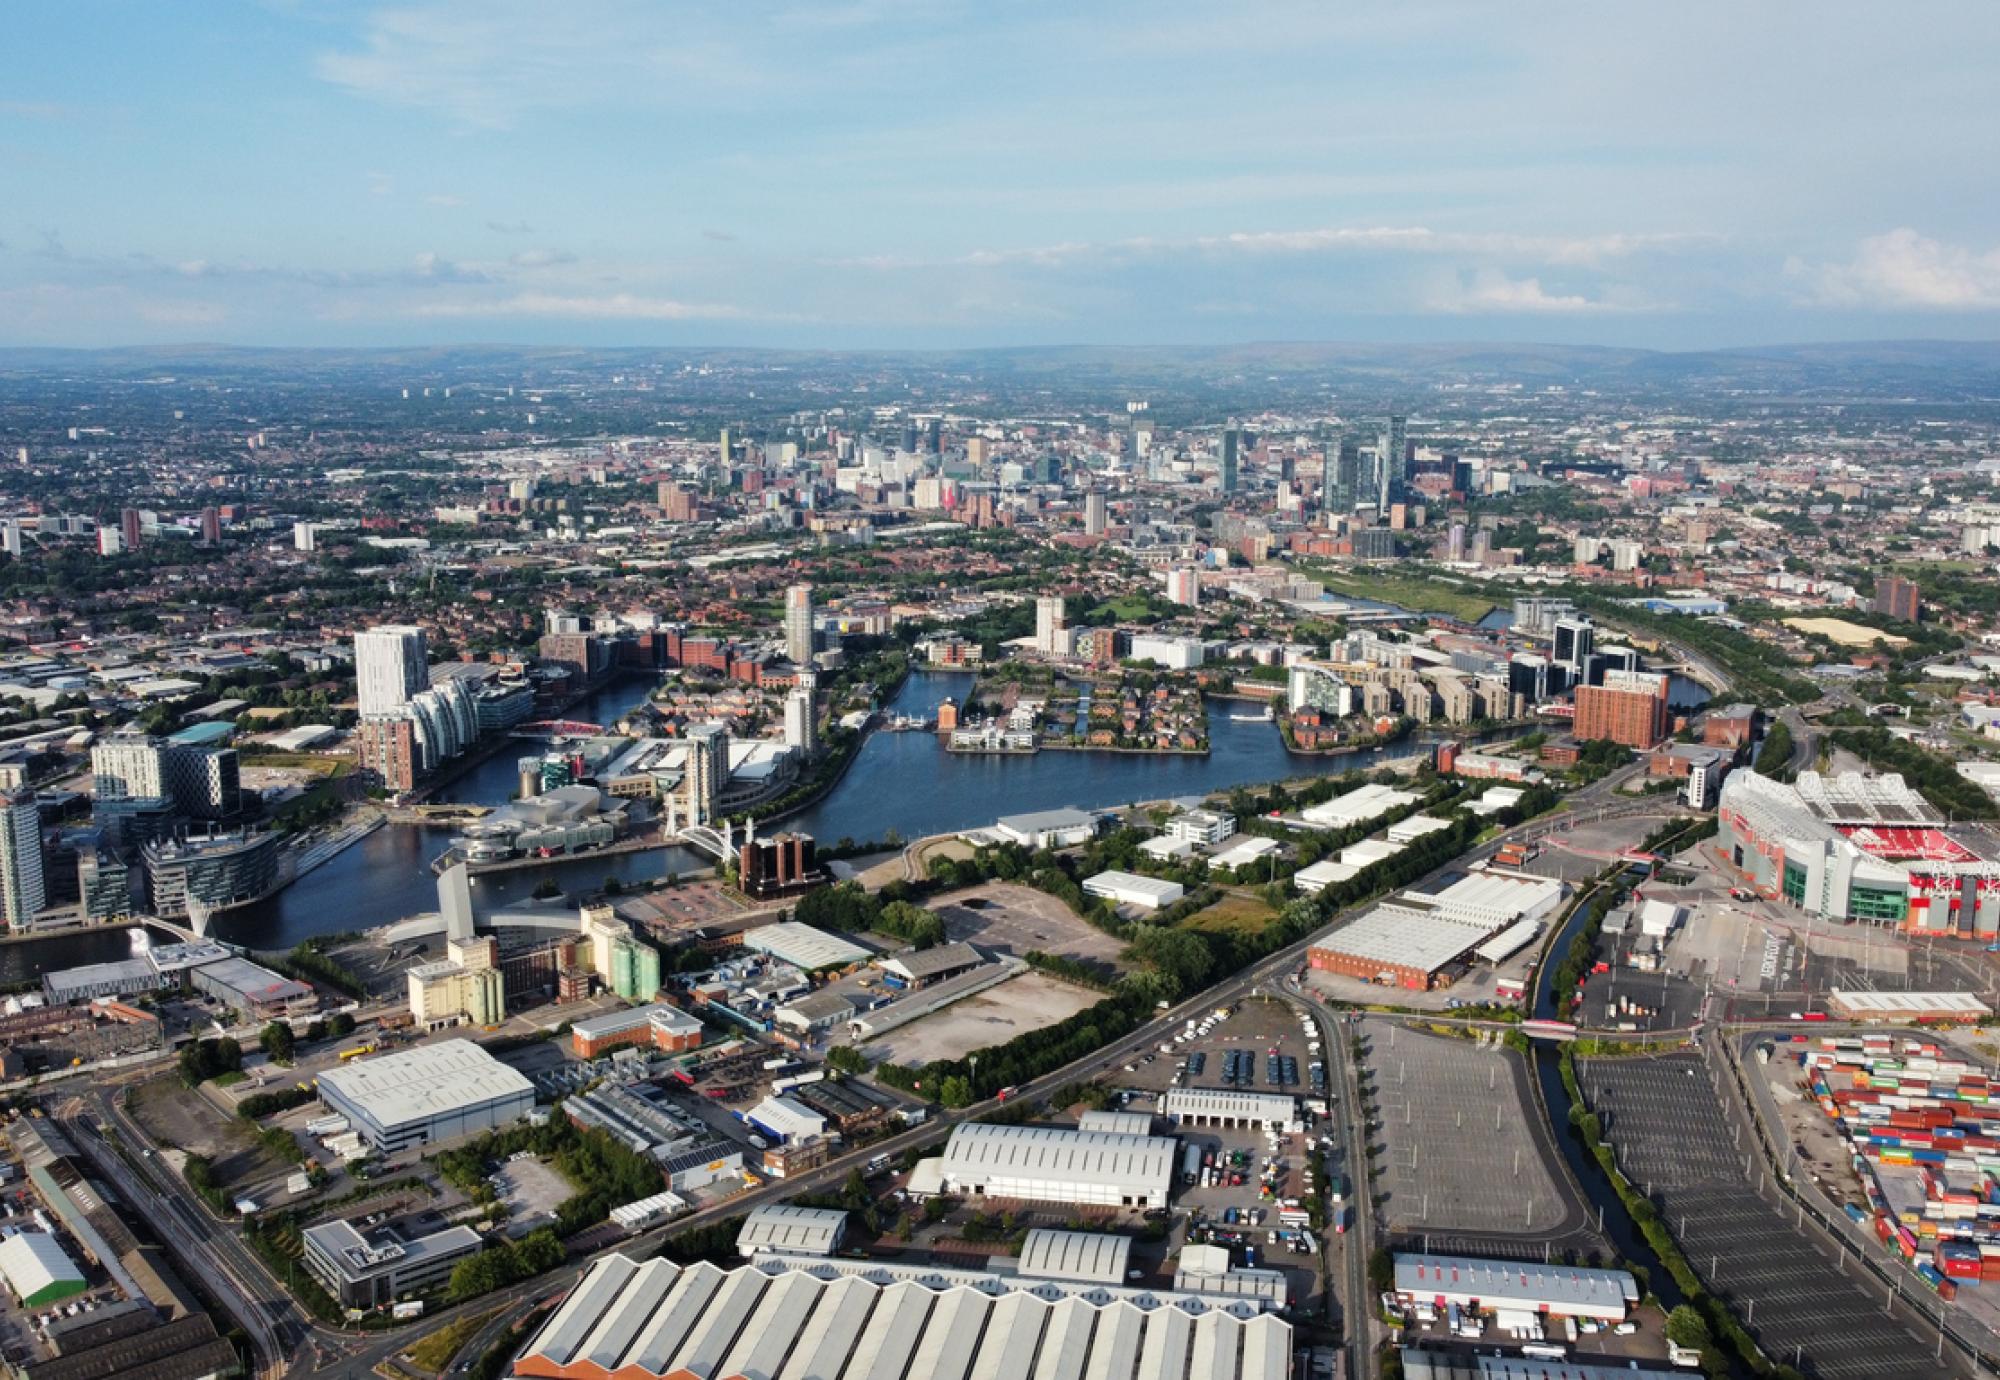 Ariel view of Manchester